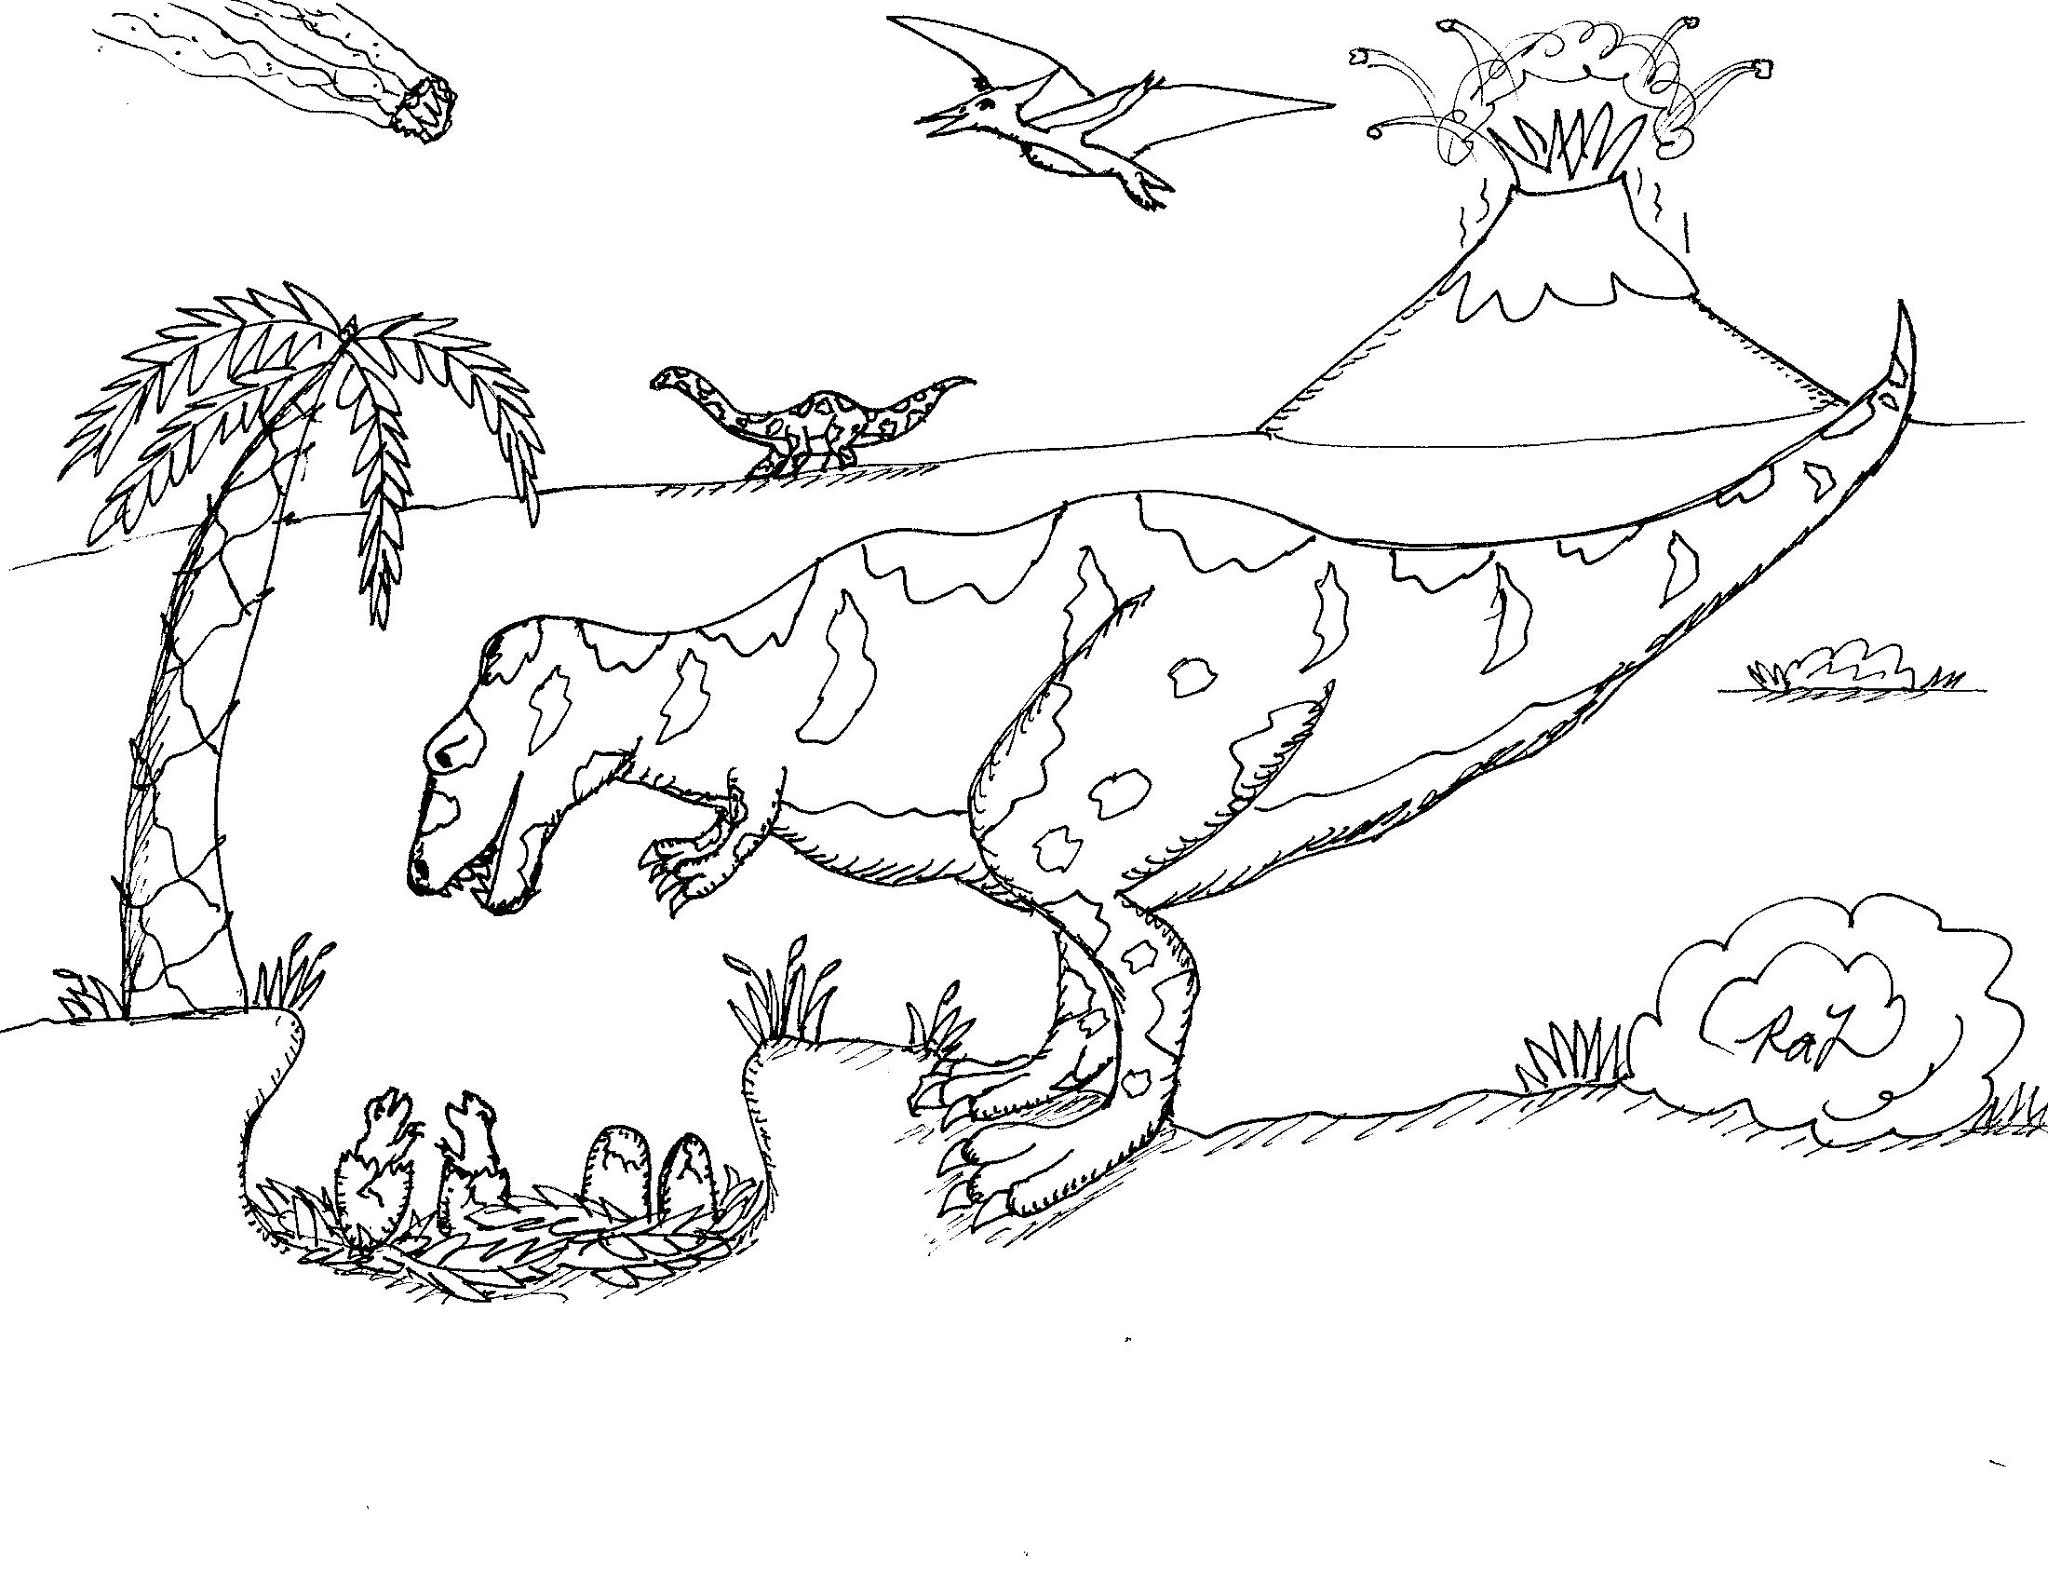 Robin's Great Coloring Pages: T rex coloring pages including Juveniles ...